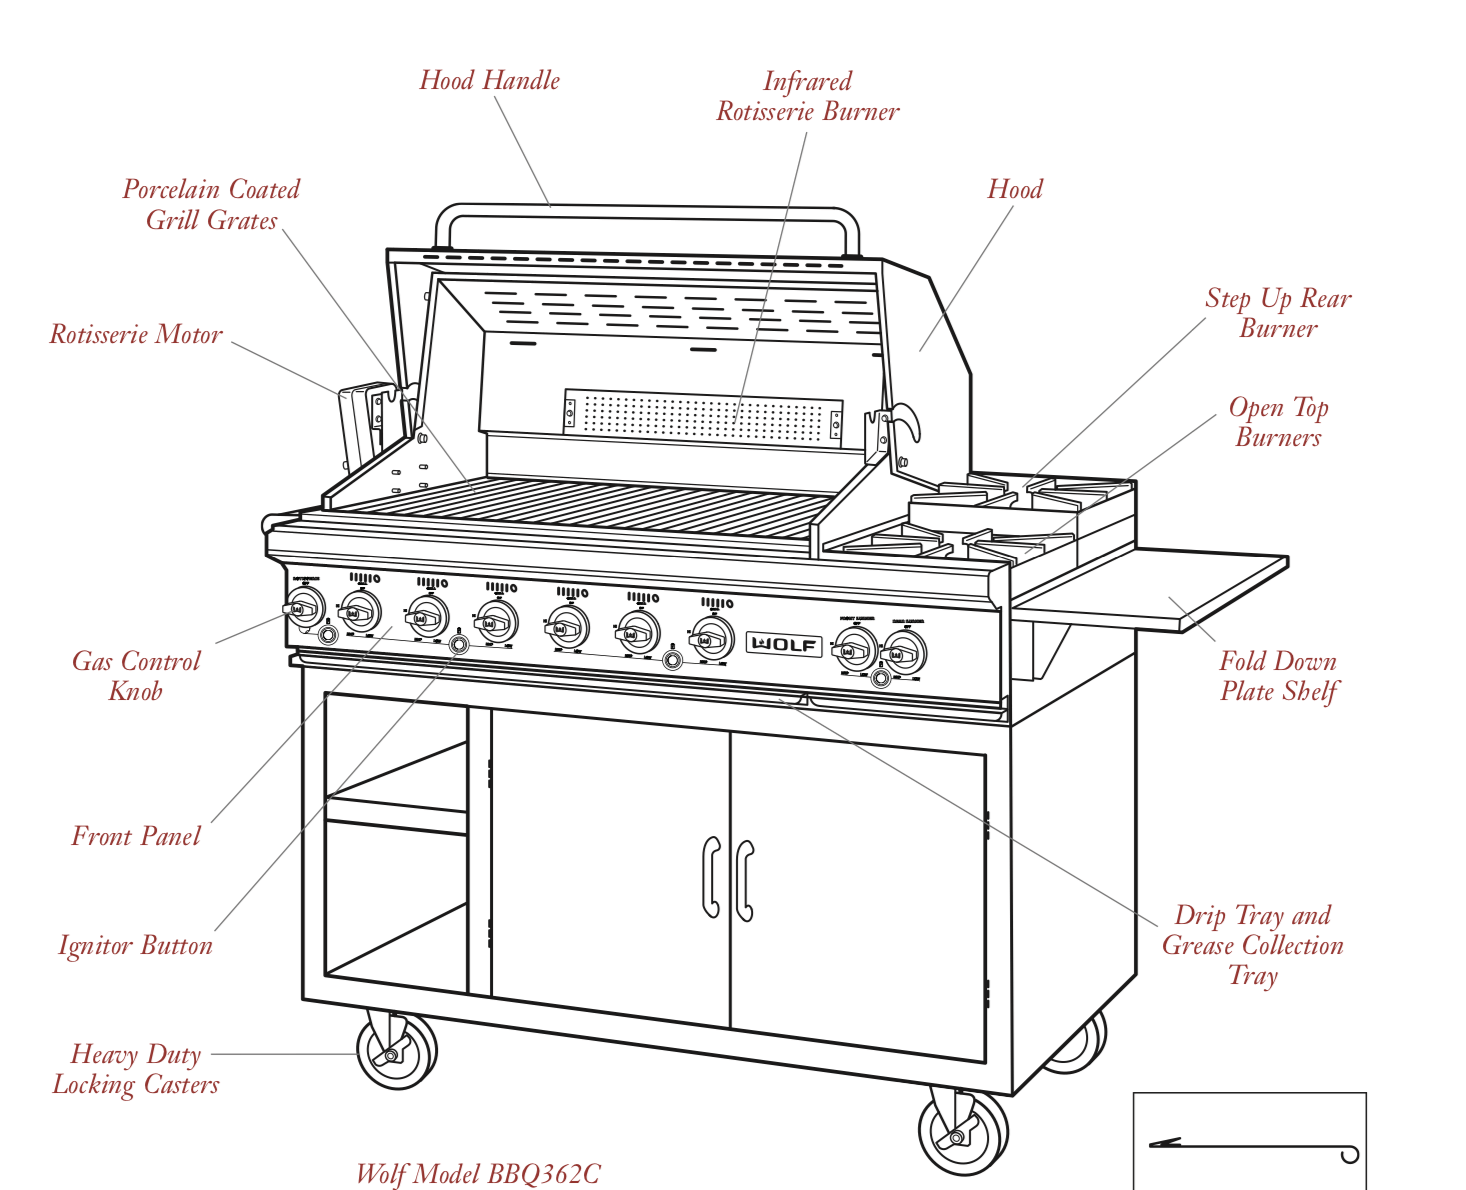 How to Clean Your Gas Grill and Grill Parts